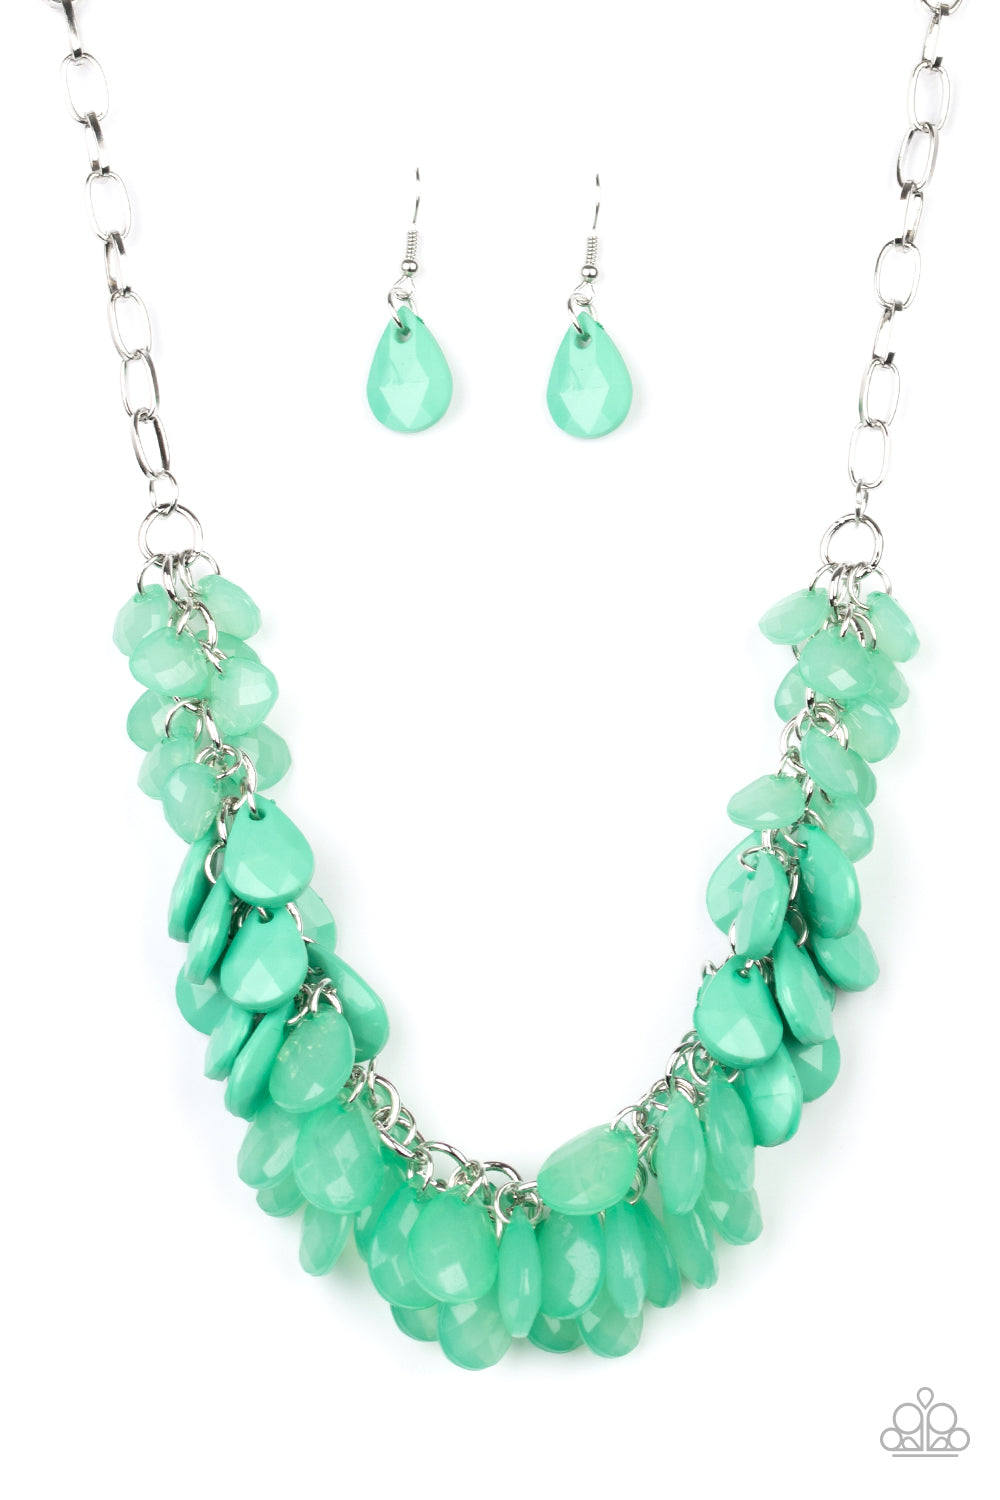 shop-sassy-affordable- colorfully-clustered-green-paparazzi-accessories